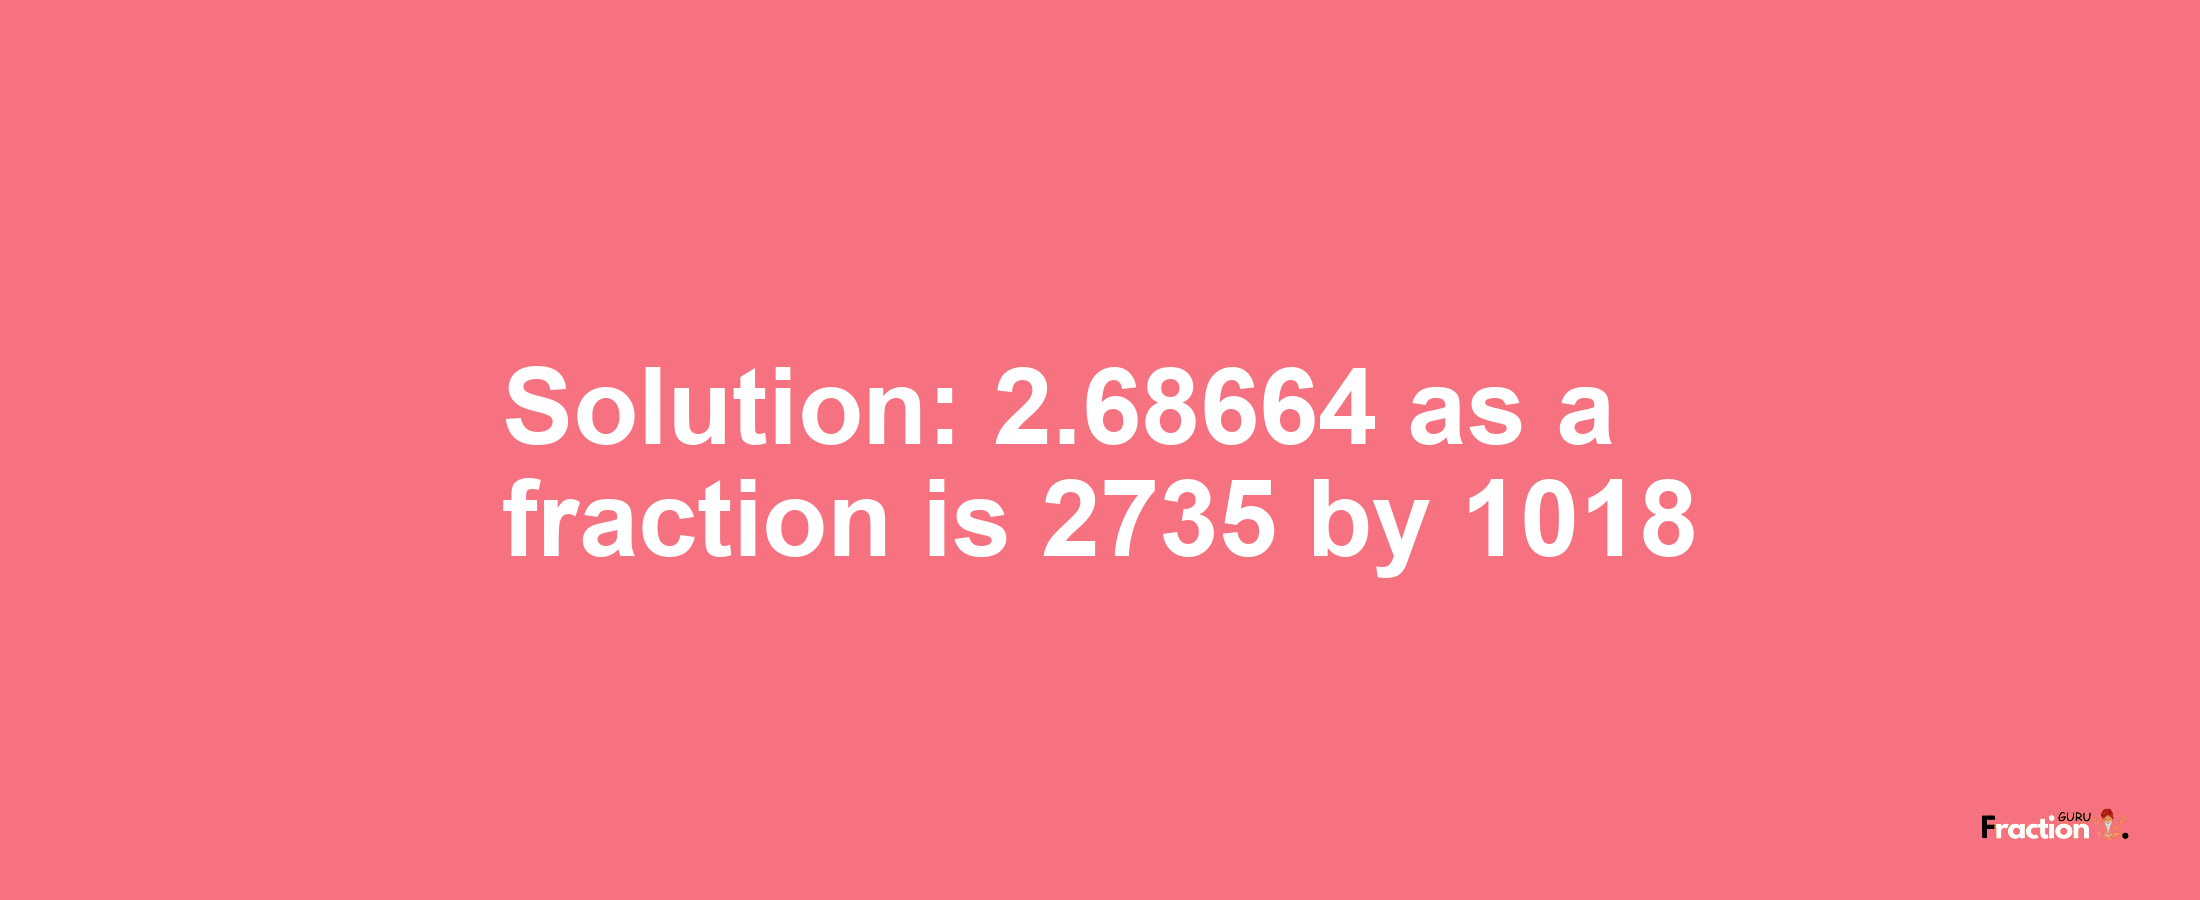 Solution:2.68664 as a fraction is 2735/1018